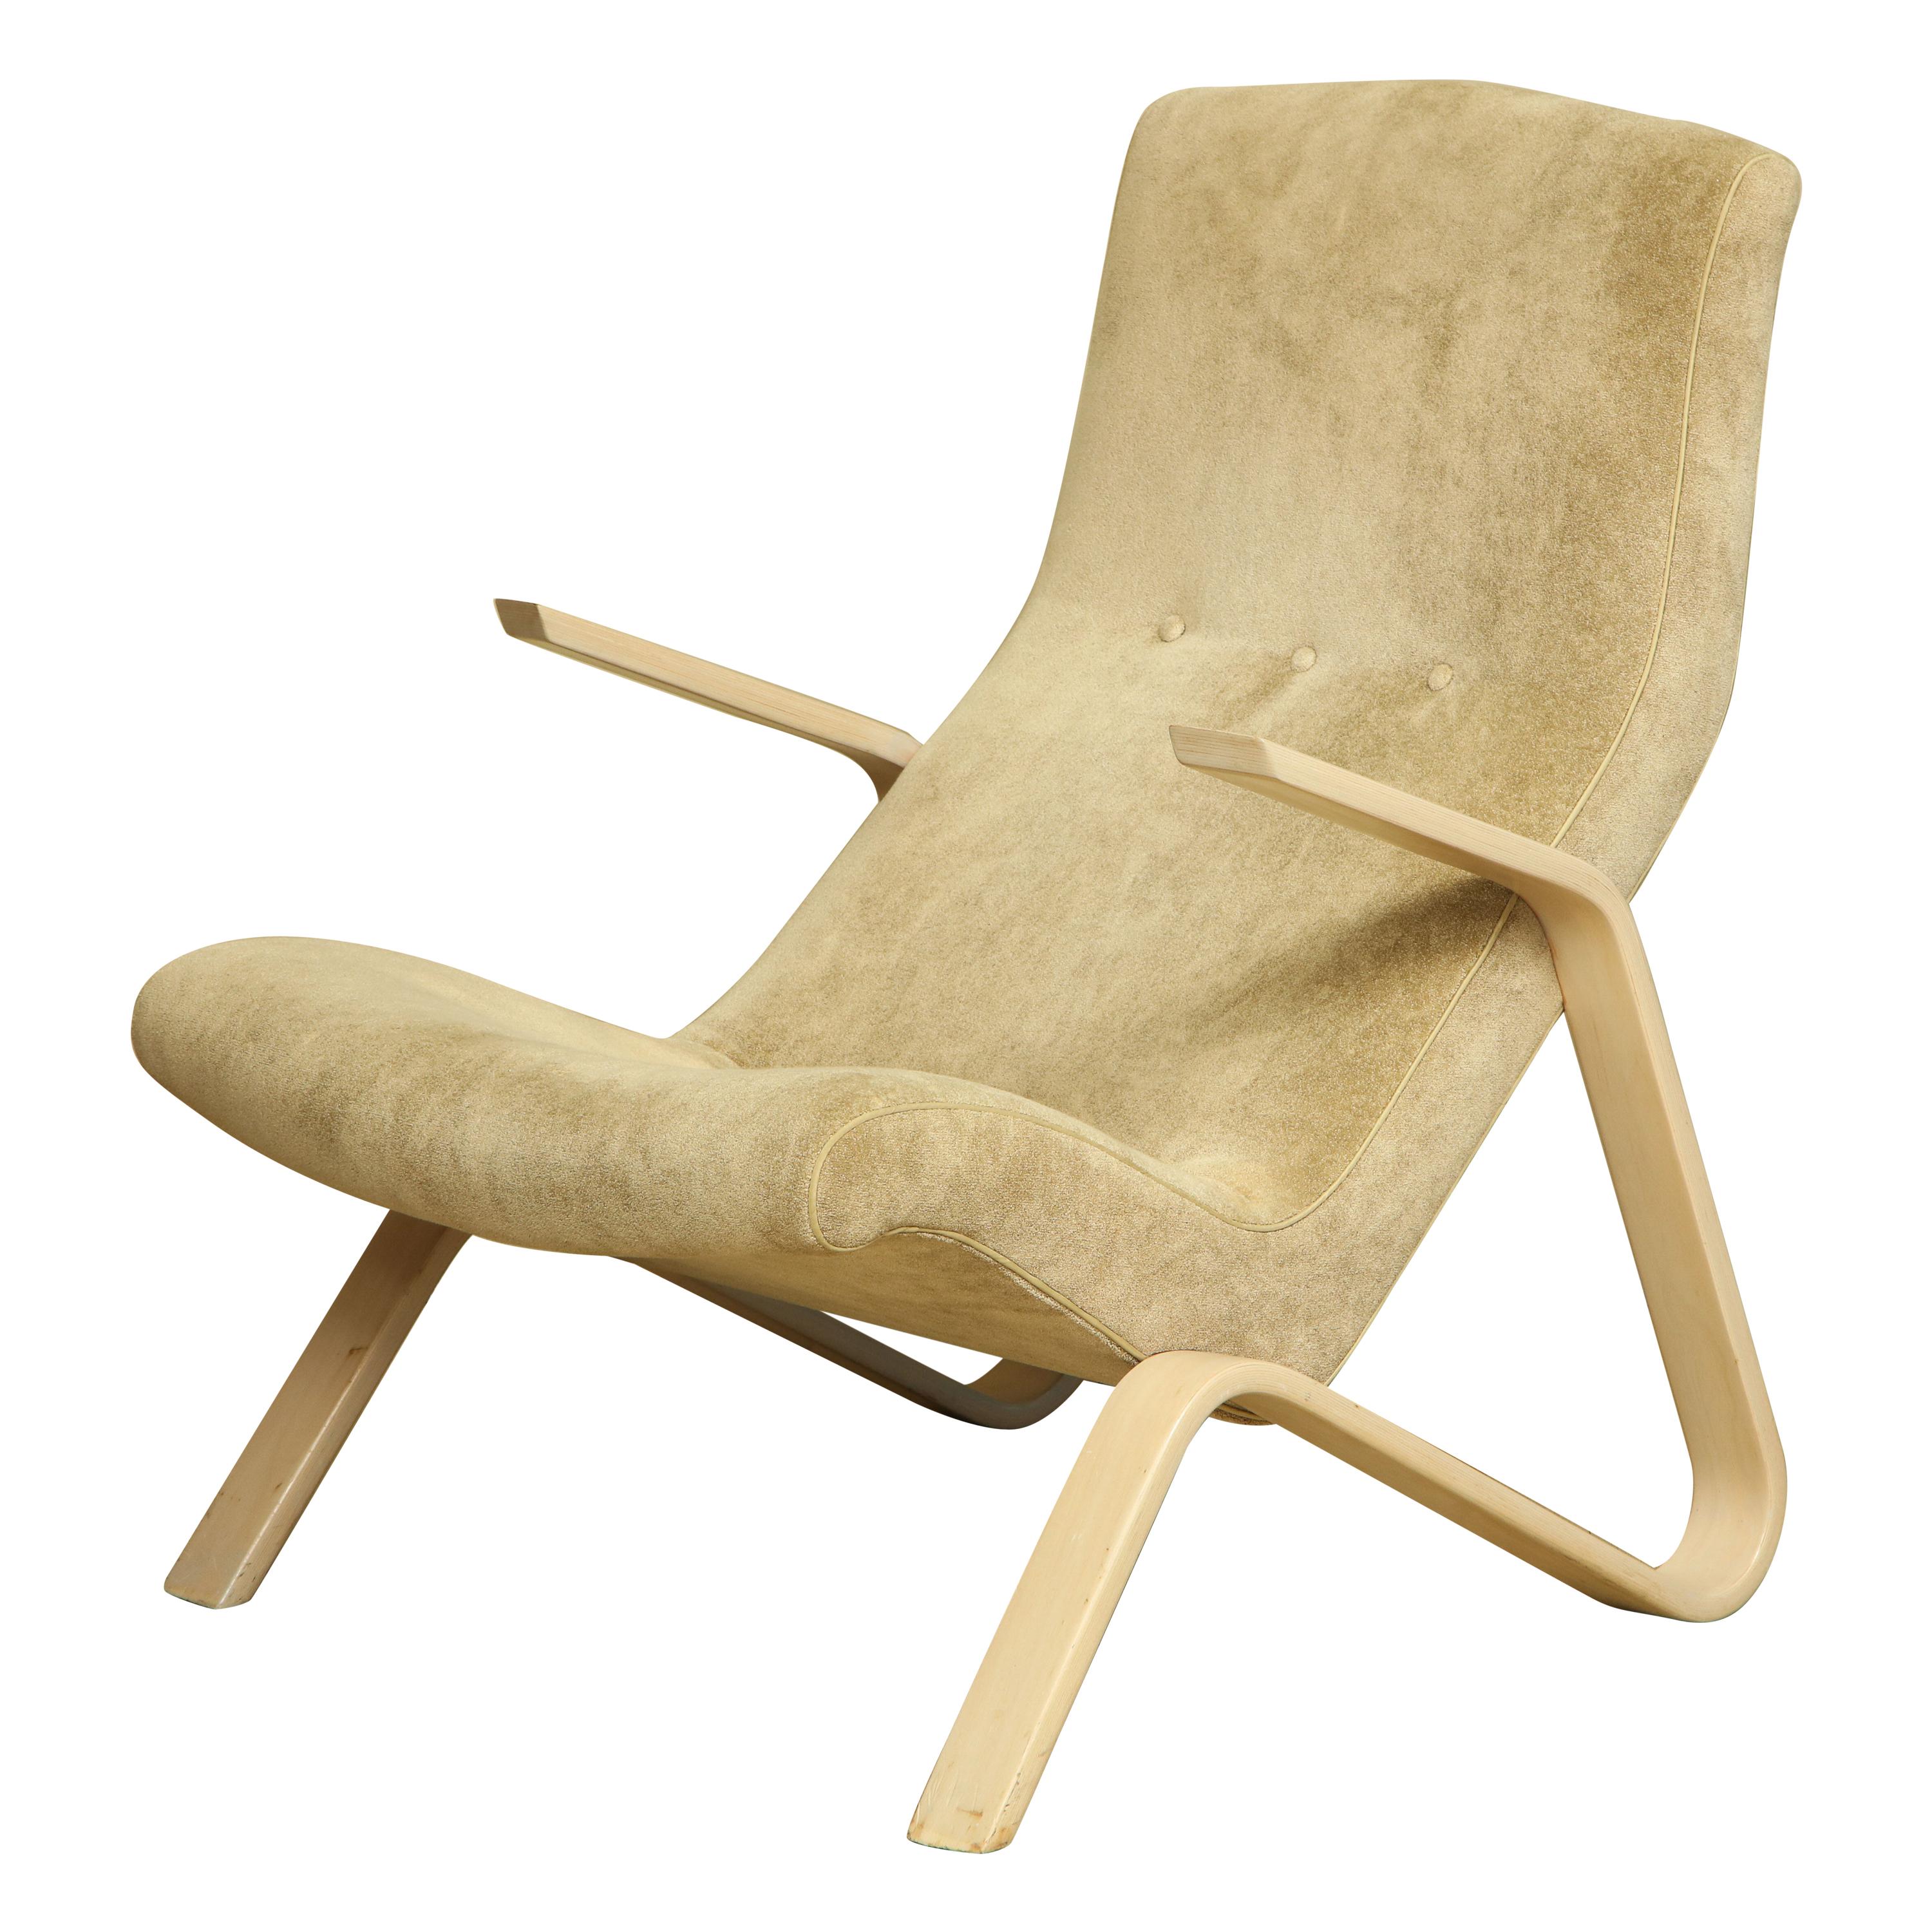 Vintage Grasshopper Armchair by Knoll